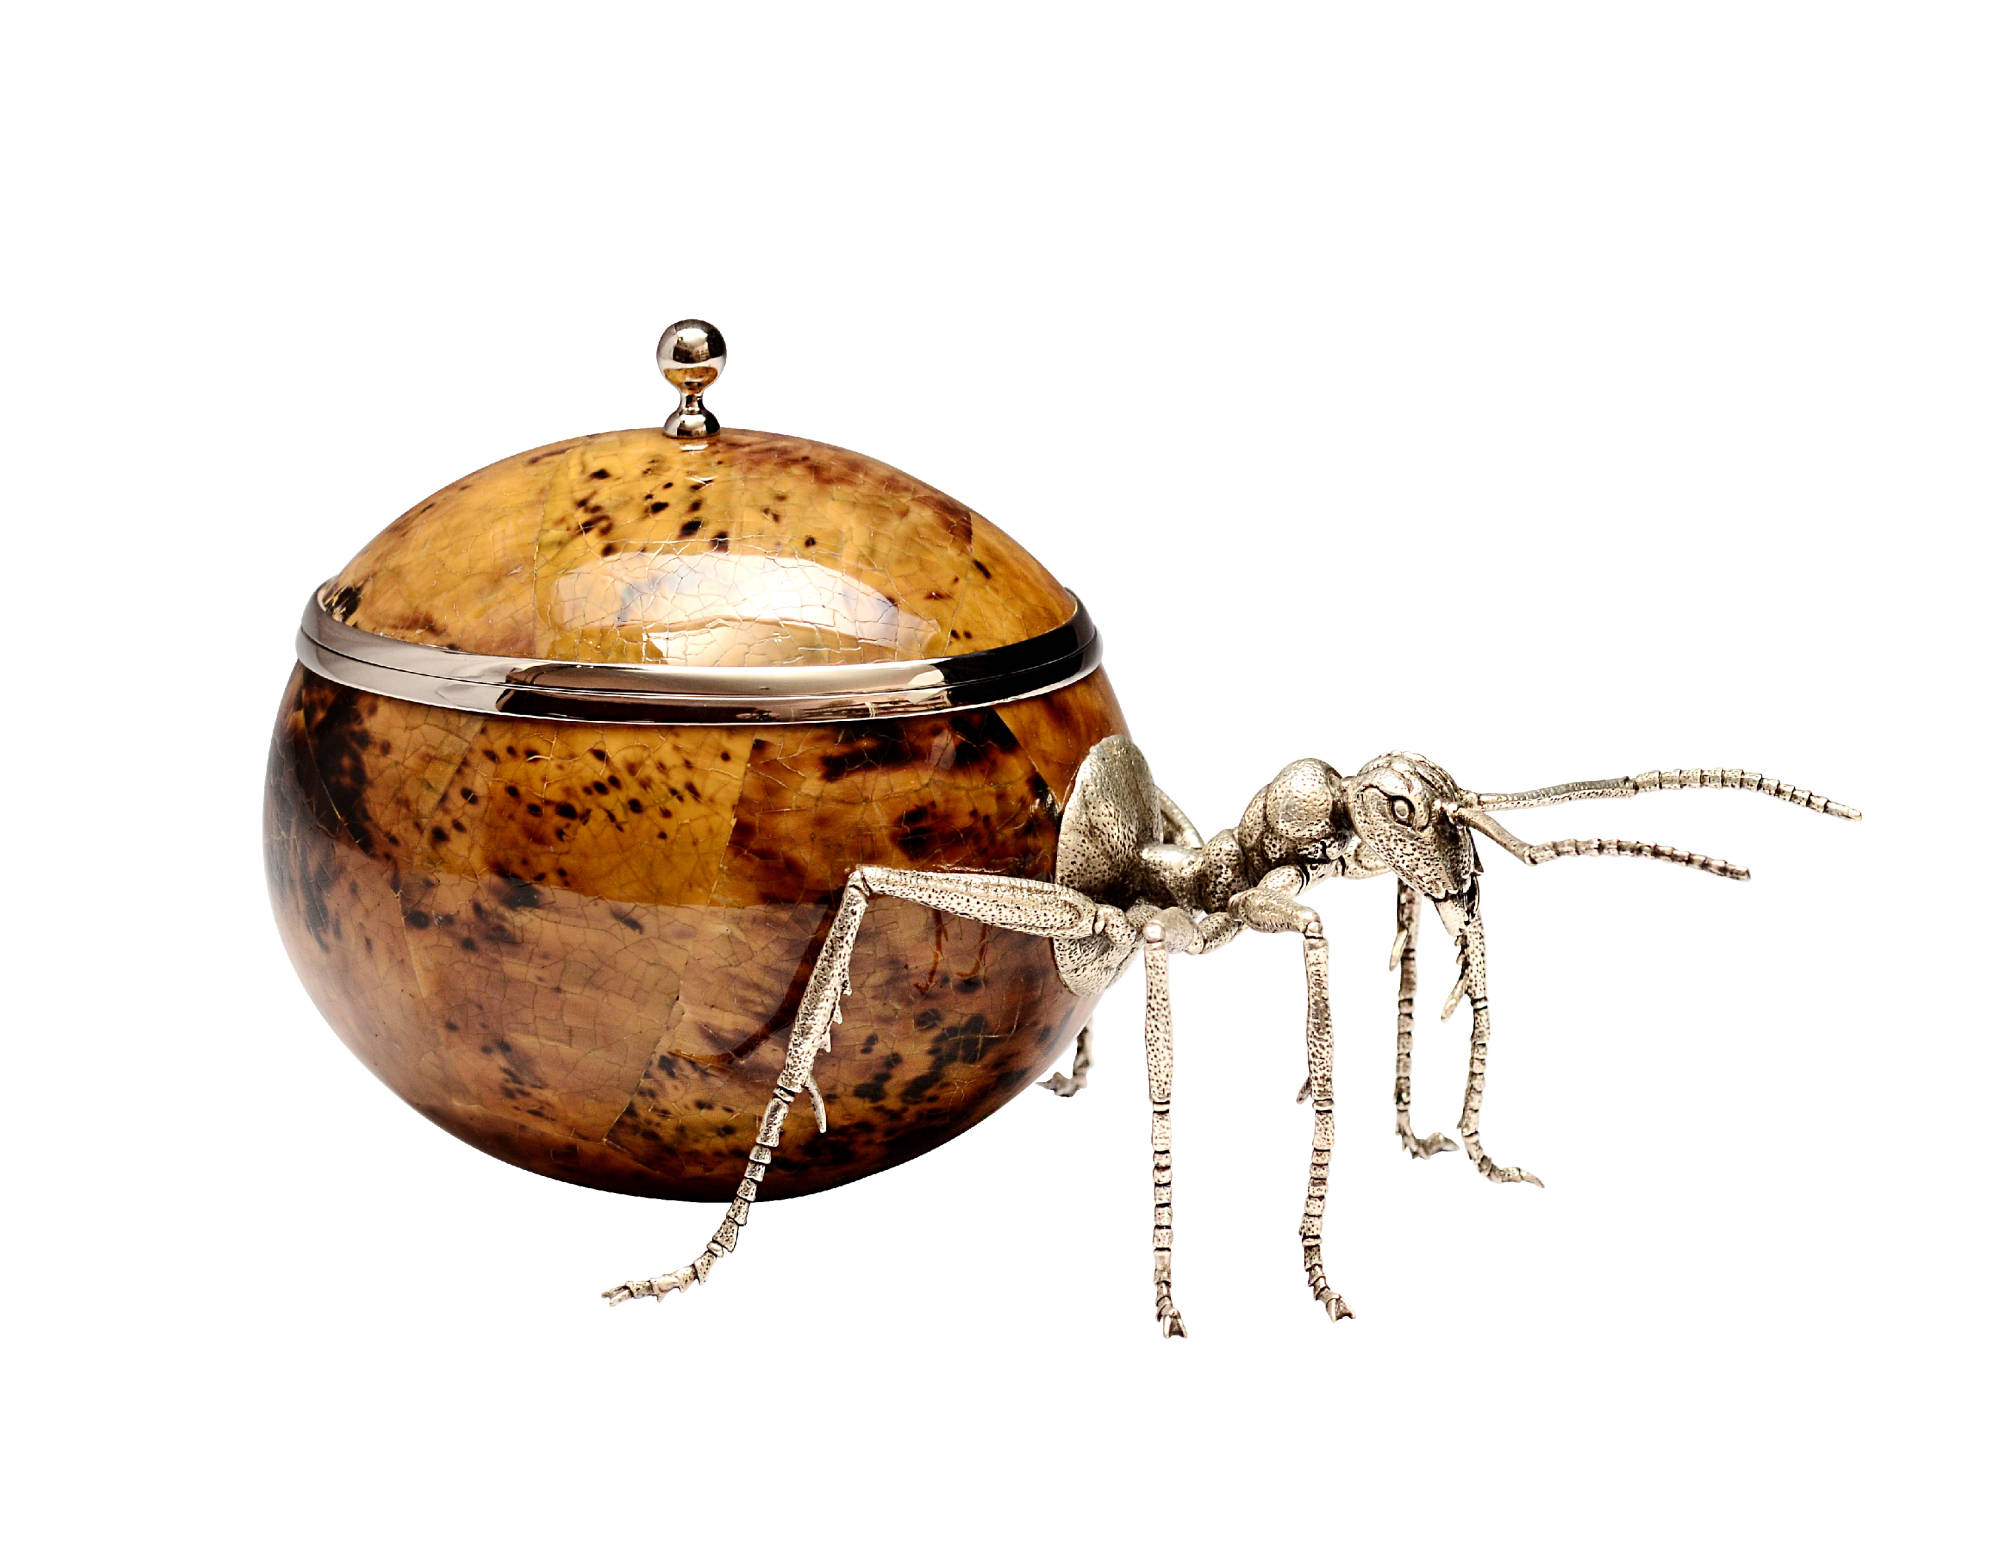 Ant trinket box with yellow tiger penshell body and nickel plated trim & ball handle